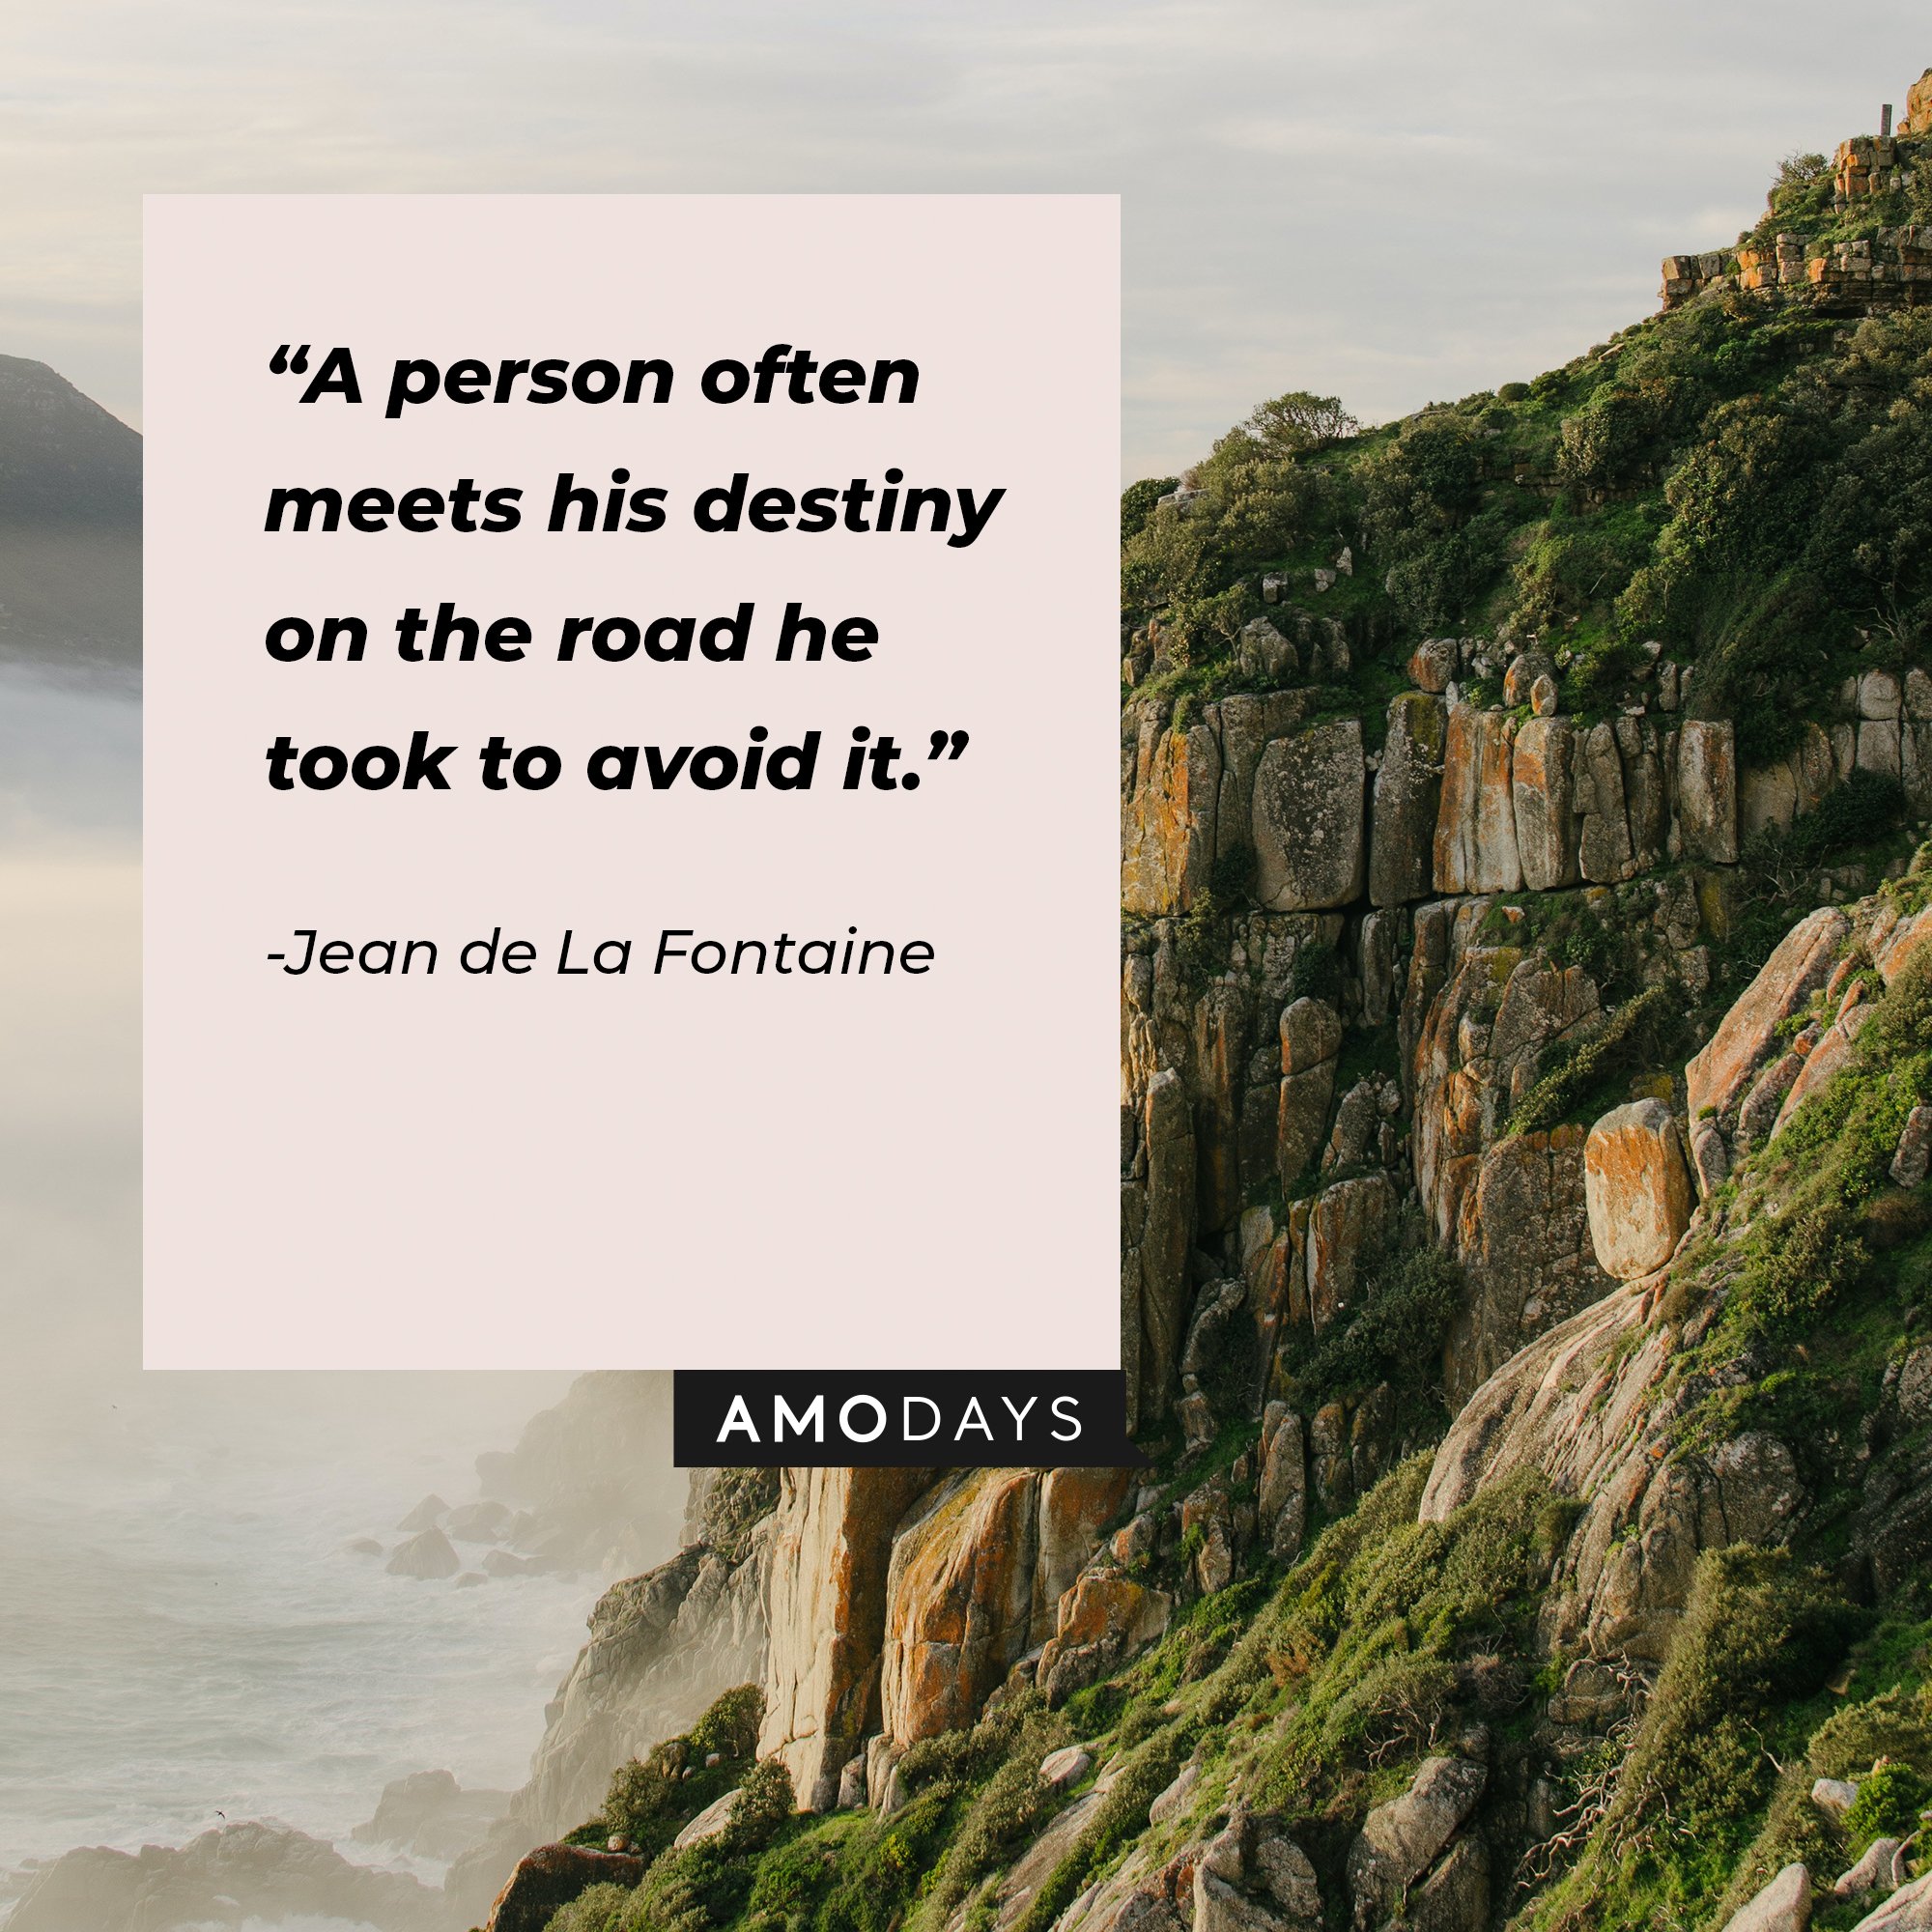 Jean de La Fontaine's quote: “A person often meets his destiny on the road he took to avoid it.”  | Image: AmoDays